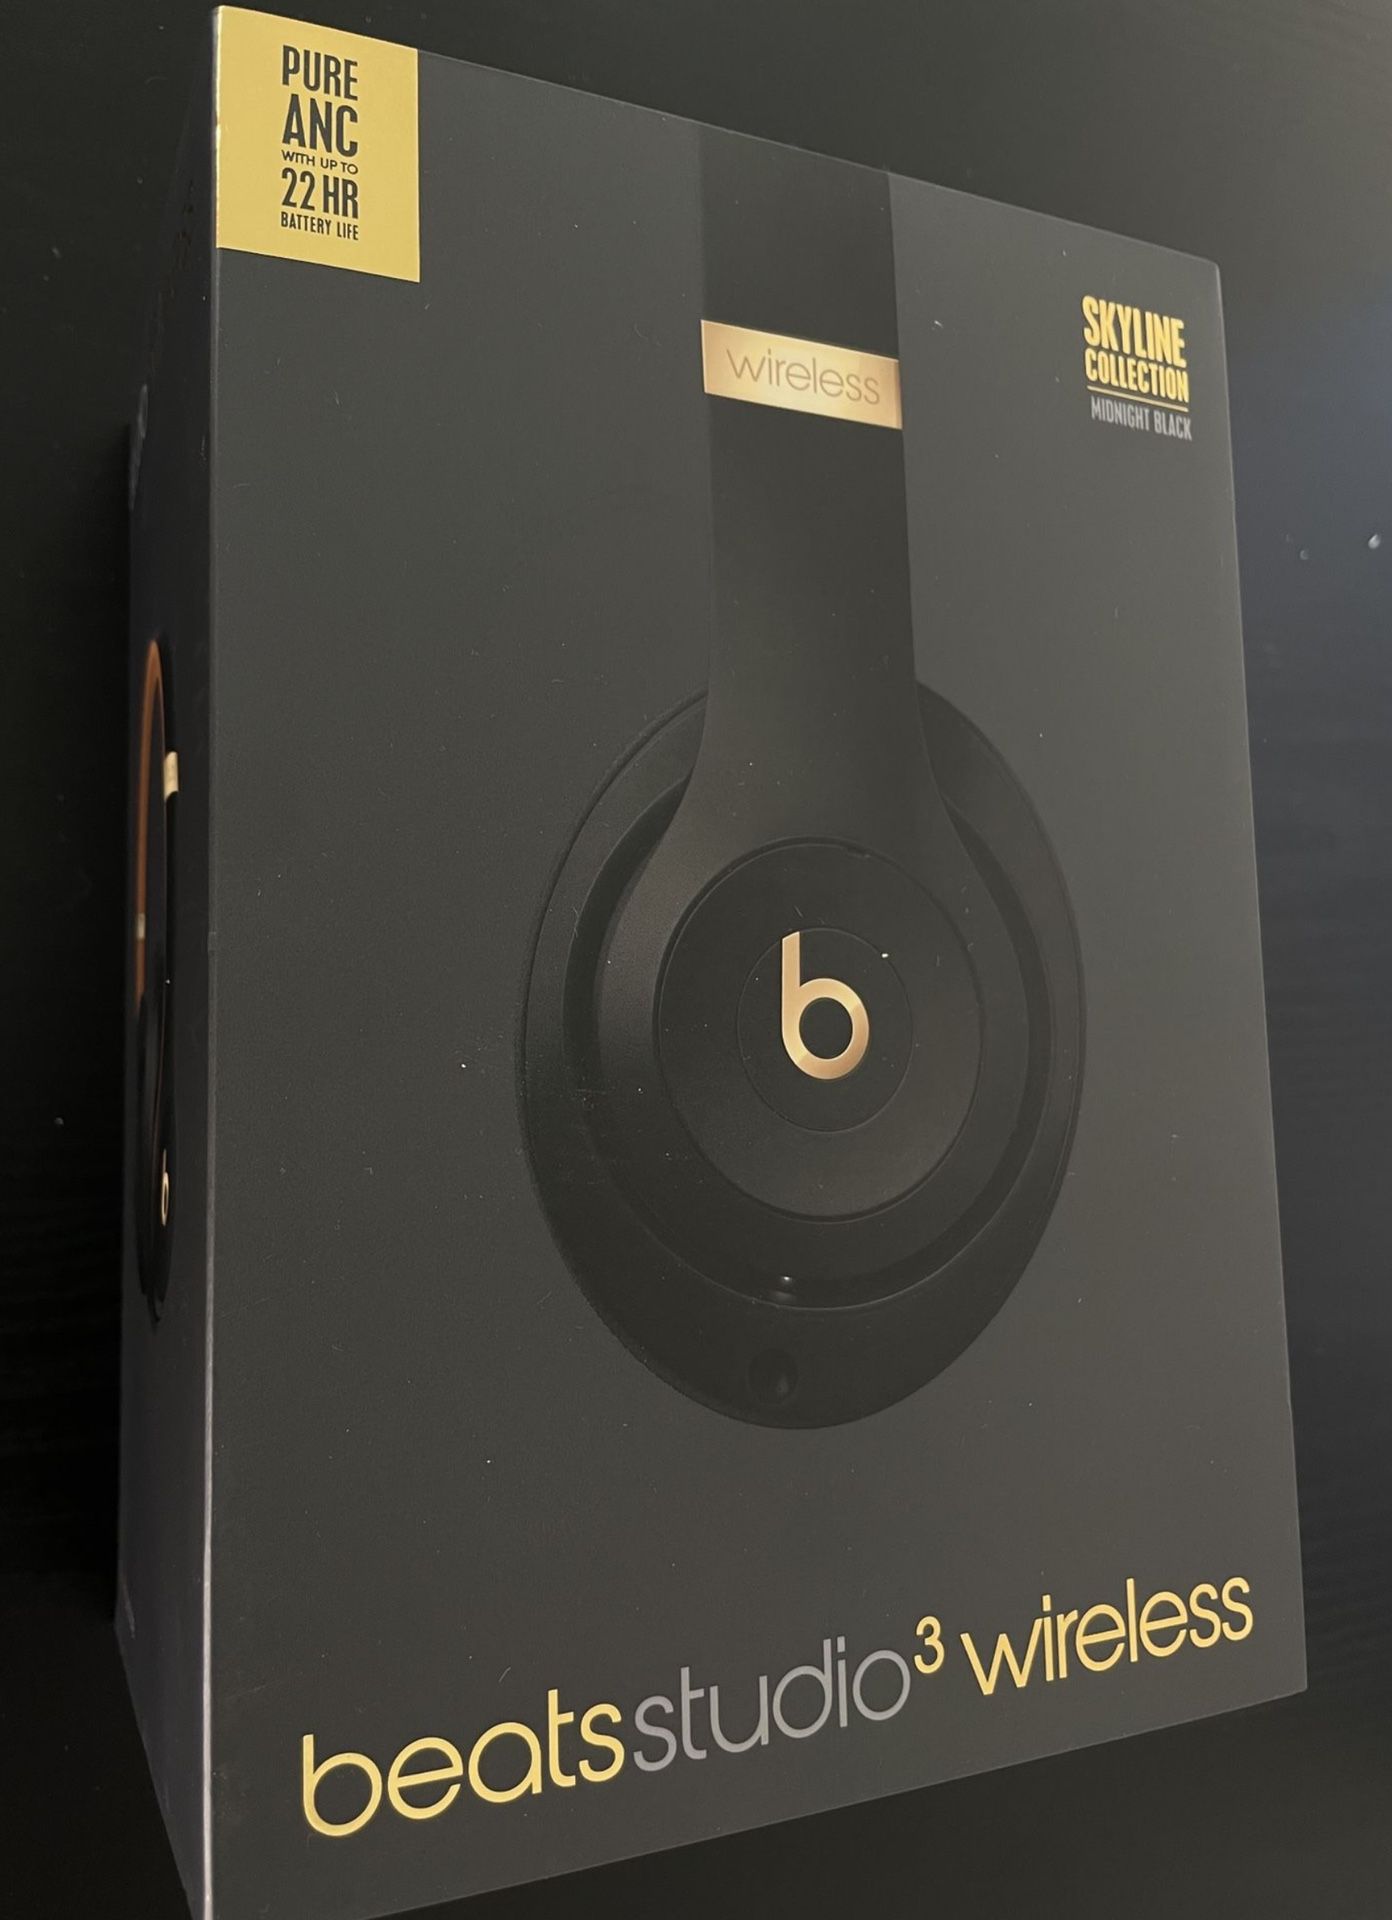 Beats Studio 3 Wireless Over The Ear Headphones (Like New! I Just Opened Them But I’m Using My New Air Pod Pros)